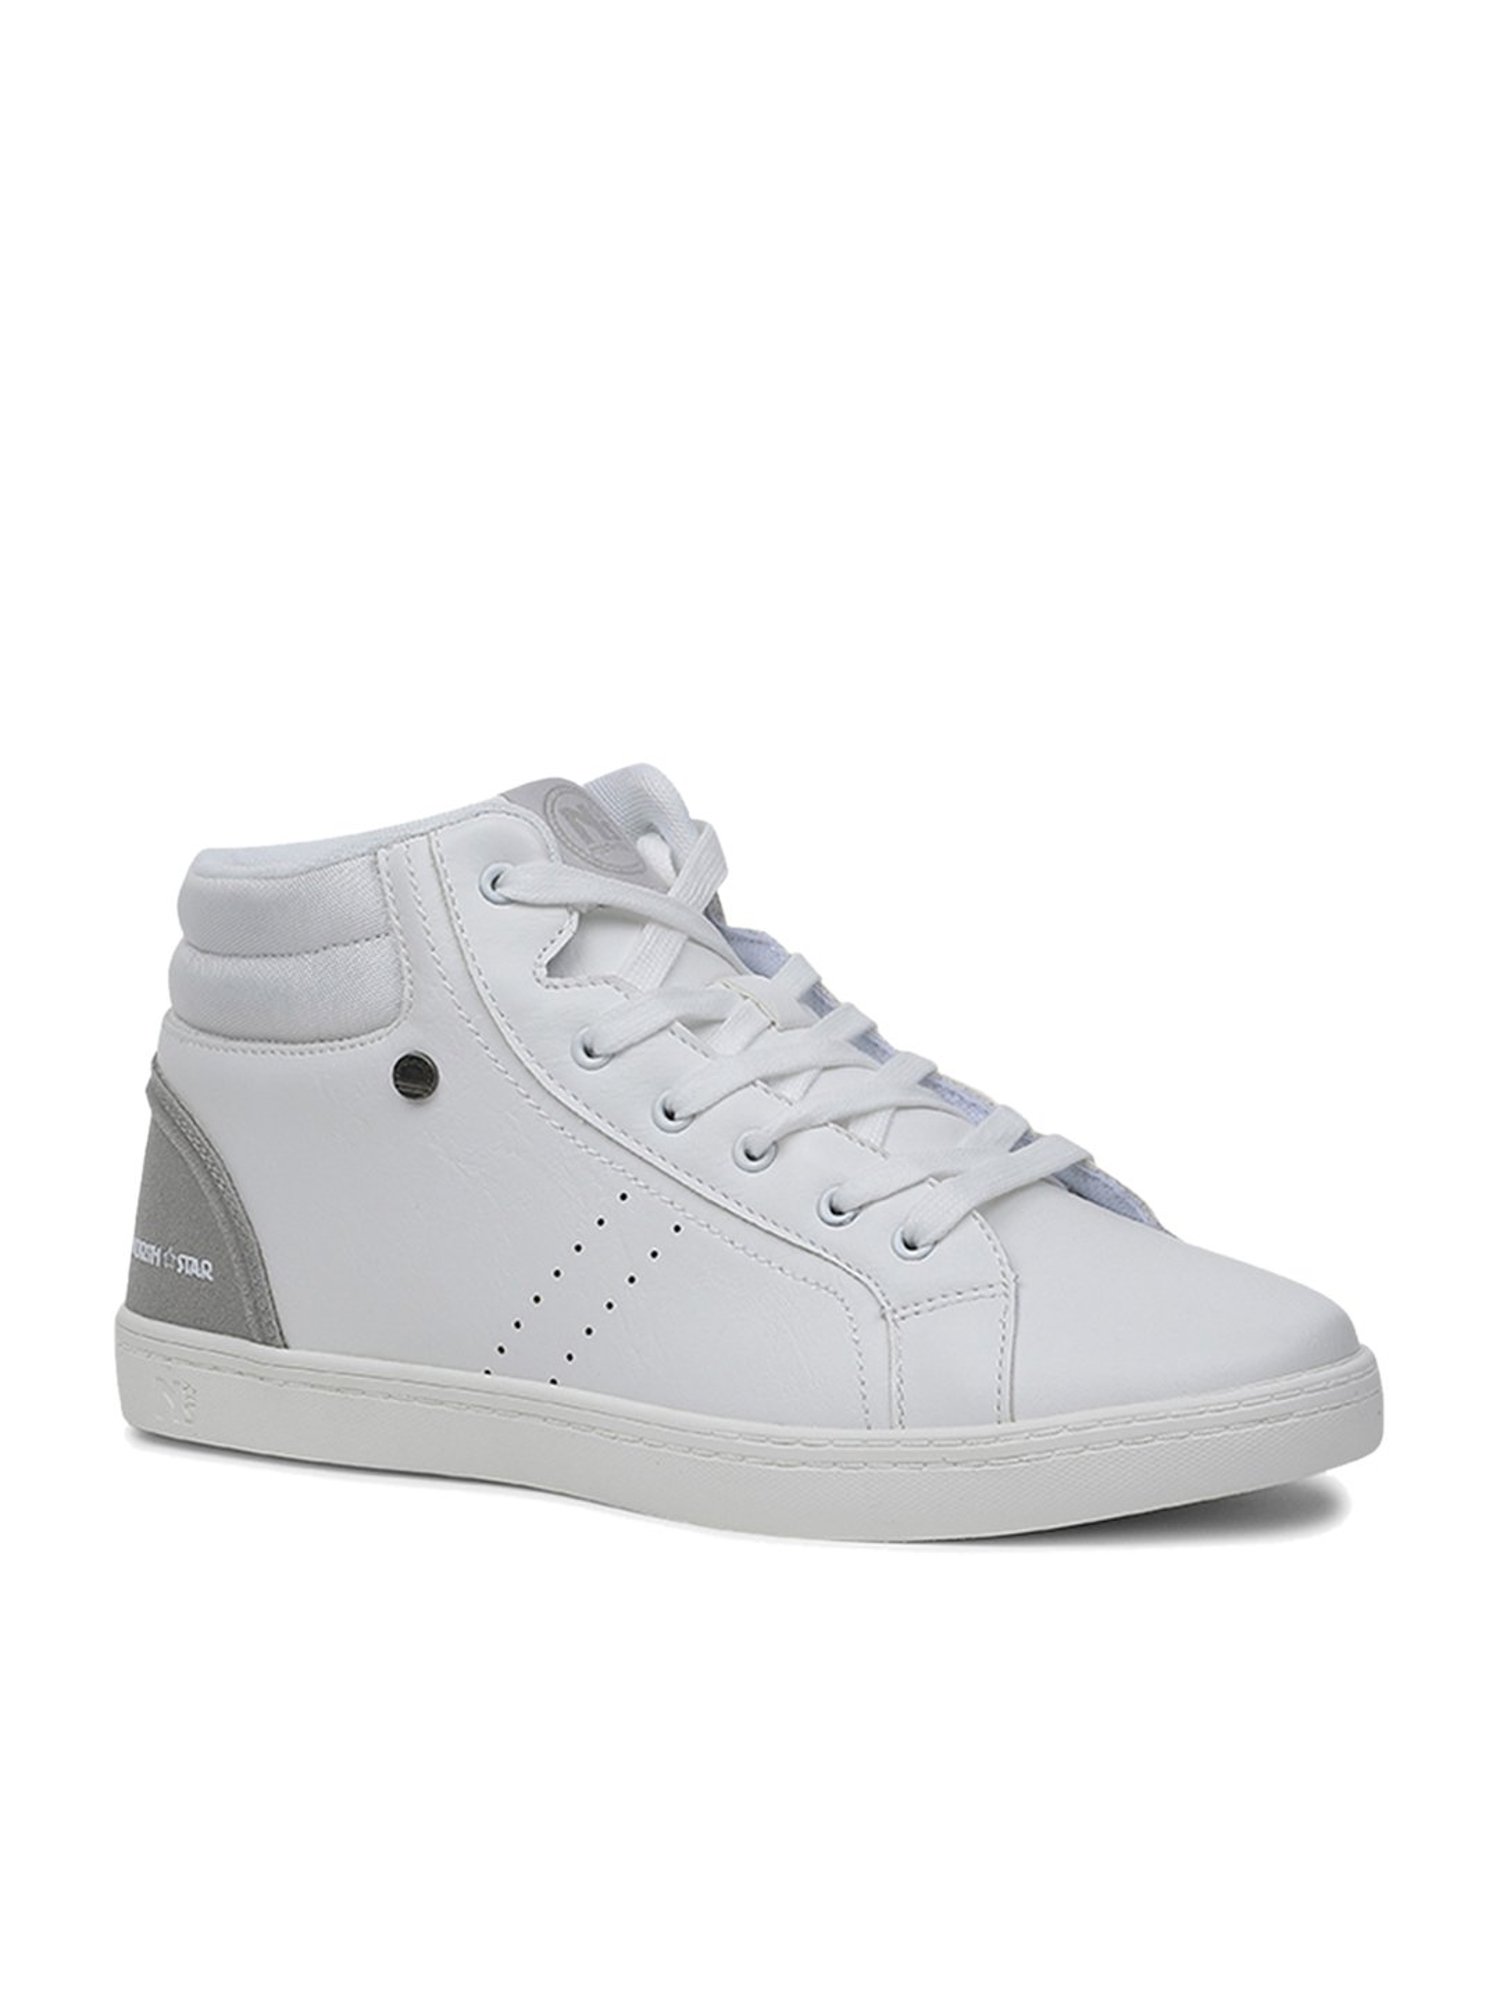 Buy North Star by Bata White Ankle High Sneakers for Men at Best Price @  Tata CLiQ